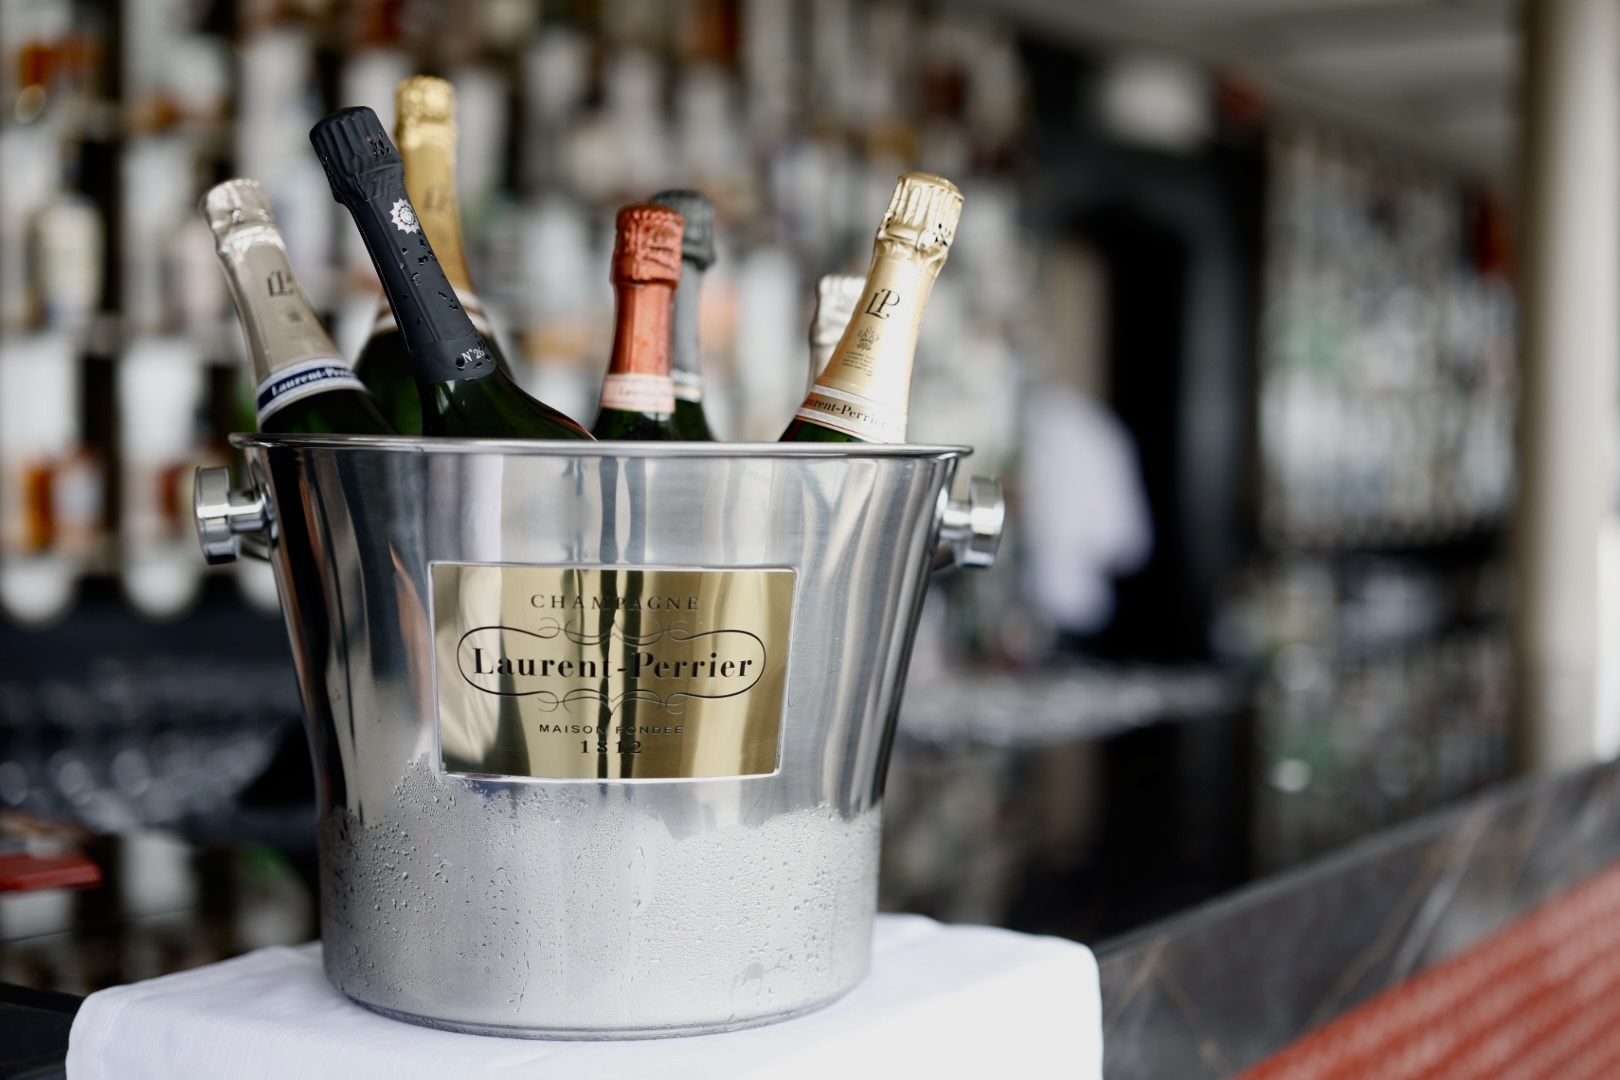 White Raven Skybar, Laurent-Perrier Champagnes Enter Special...